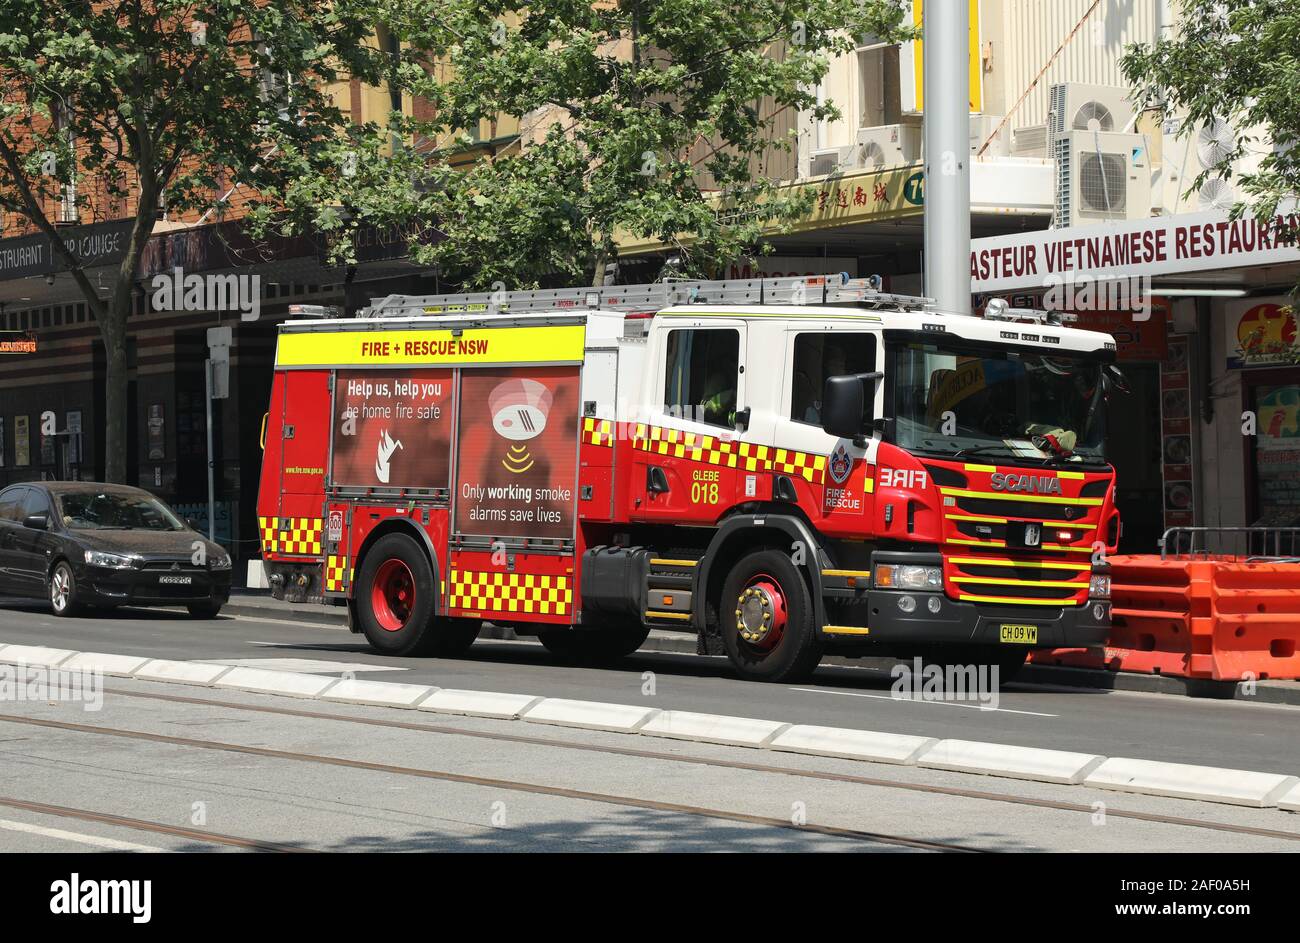 New South Wales fire engine in Sydney, Australia. Stock Photo